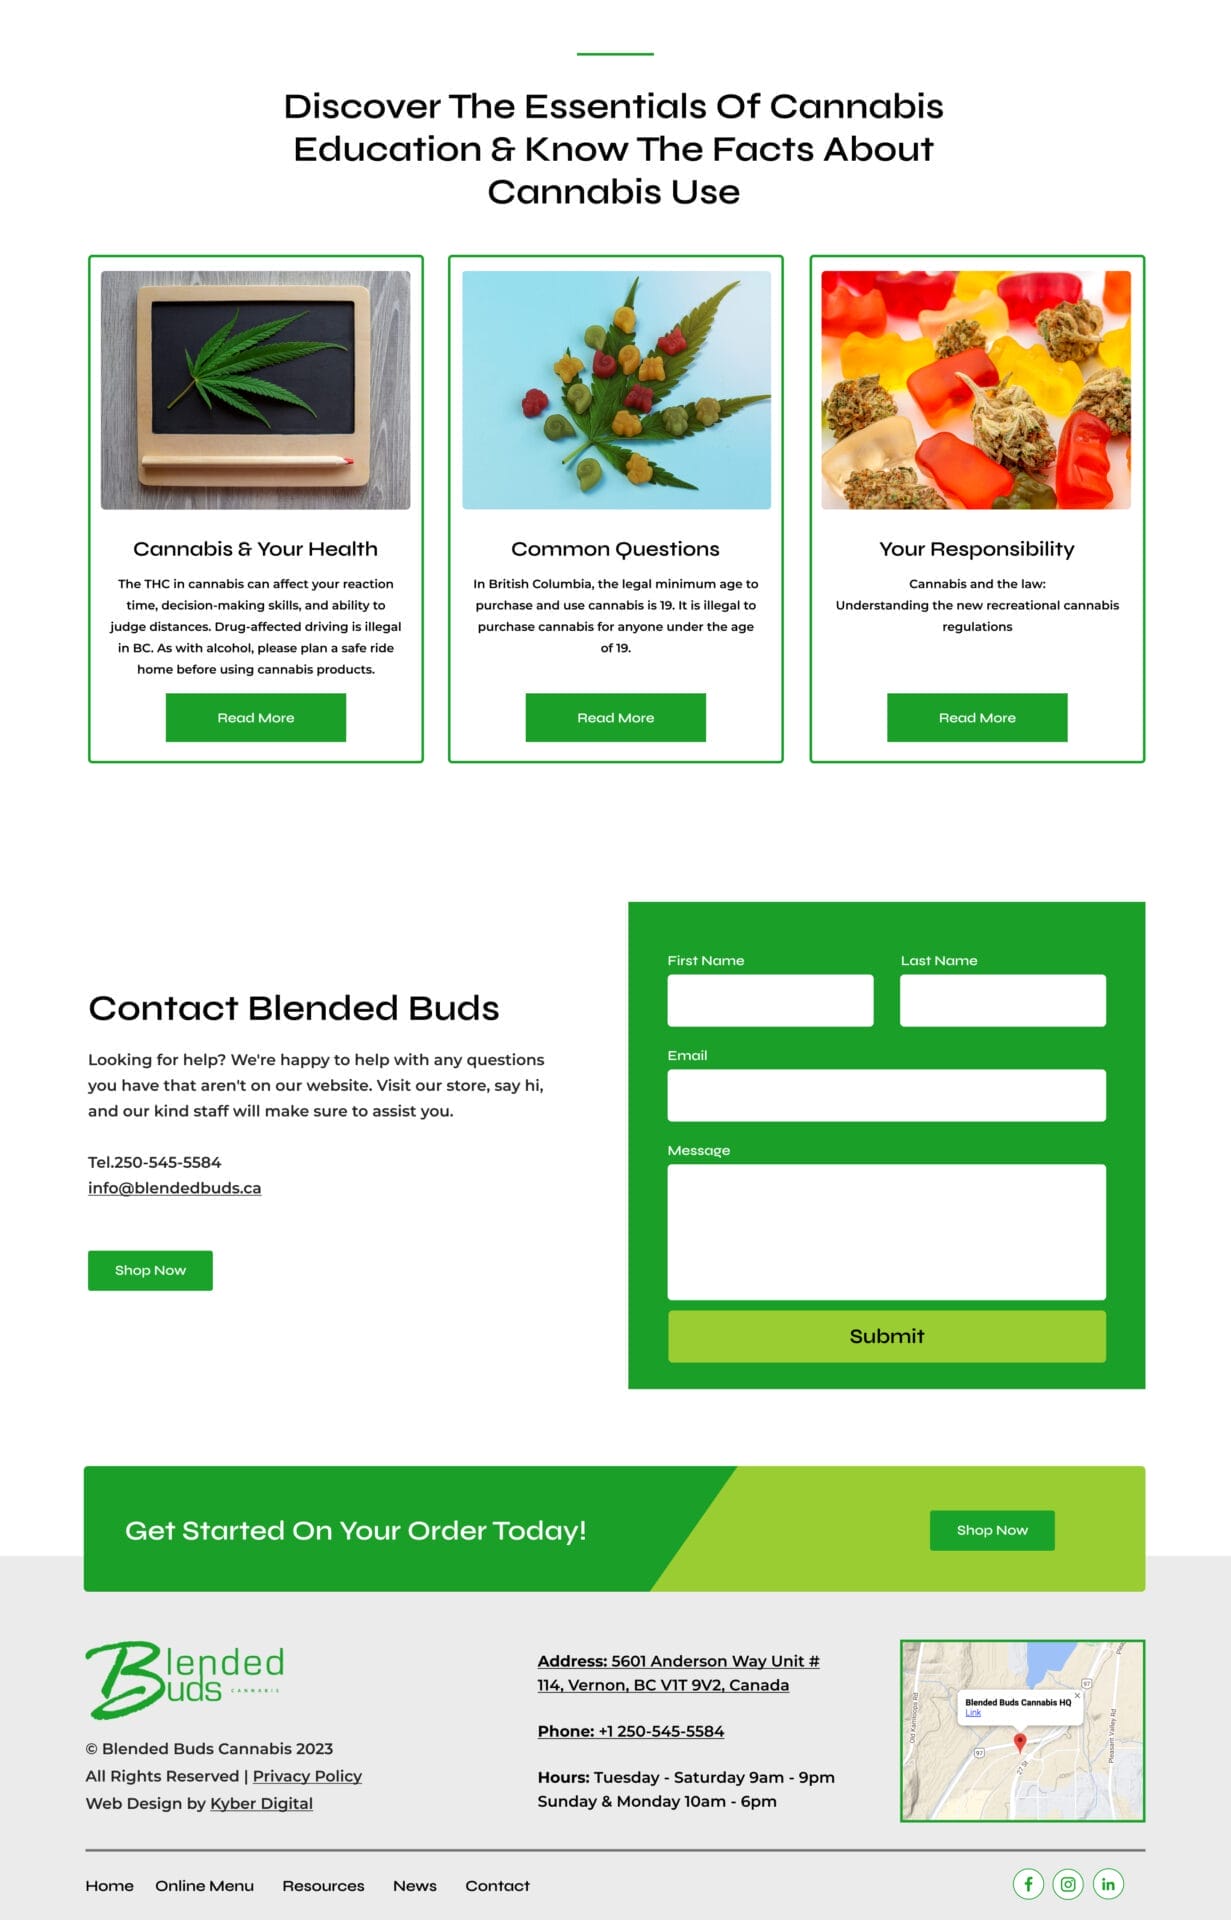 The homepage of a cannabis education website.